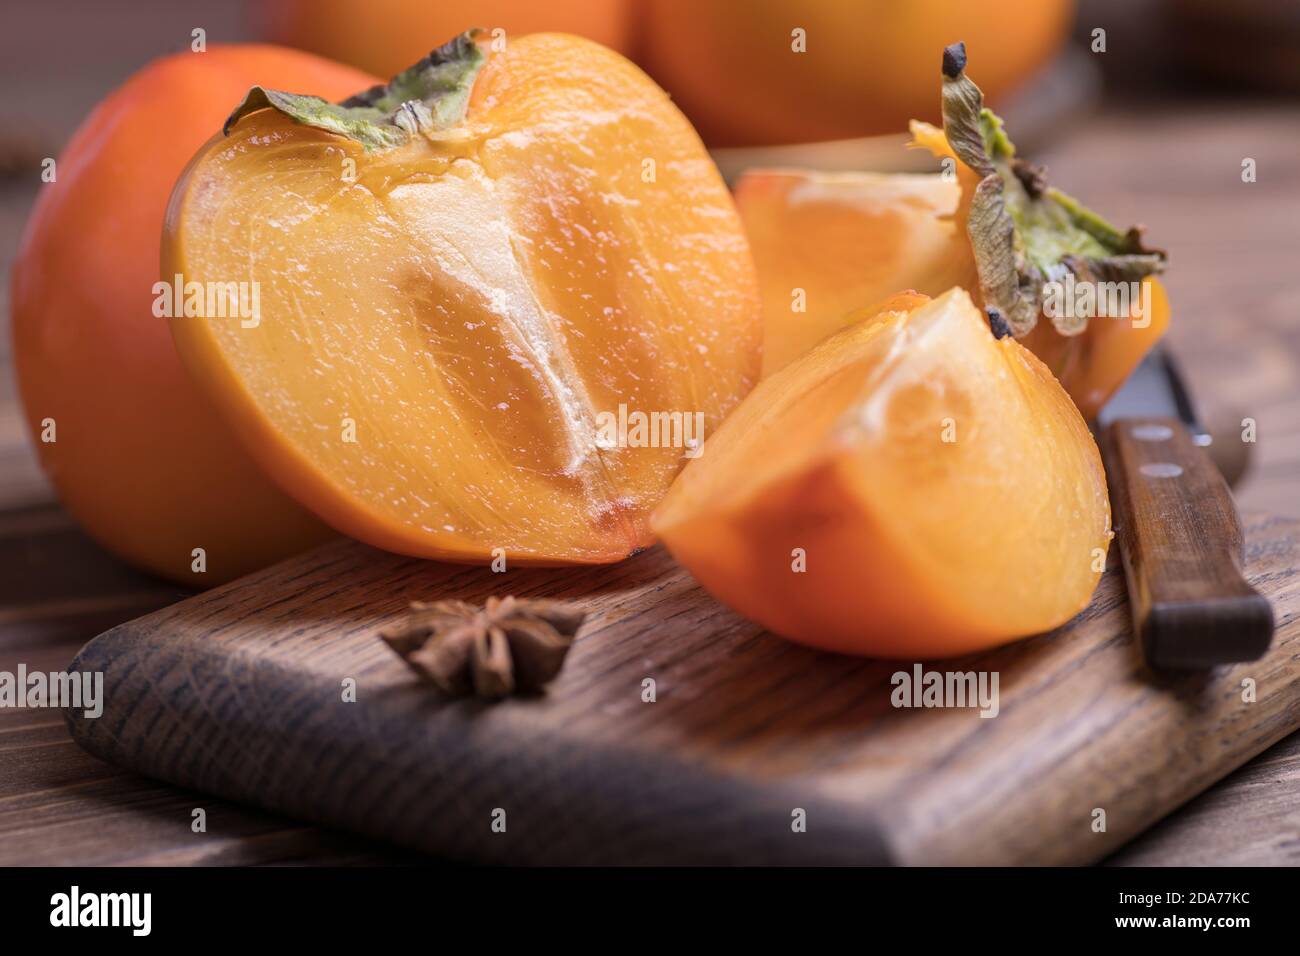 fresh ripe, orange jucy persimmons cut into slices, close-up. Stock Photo